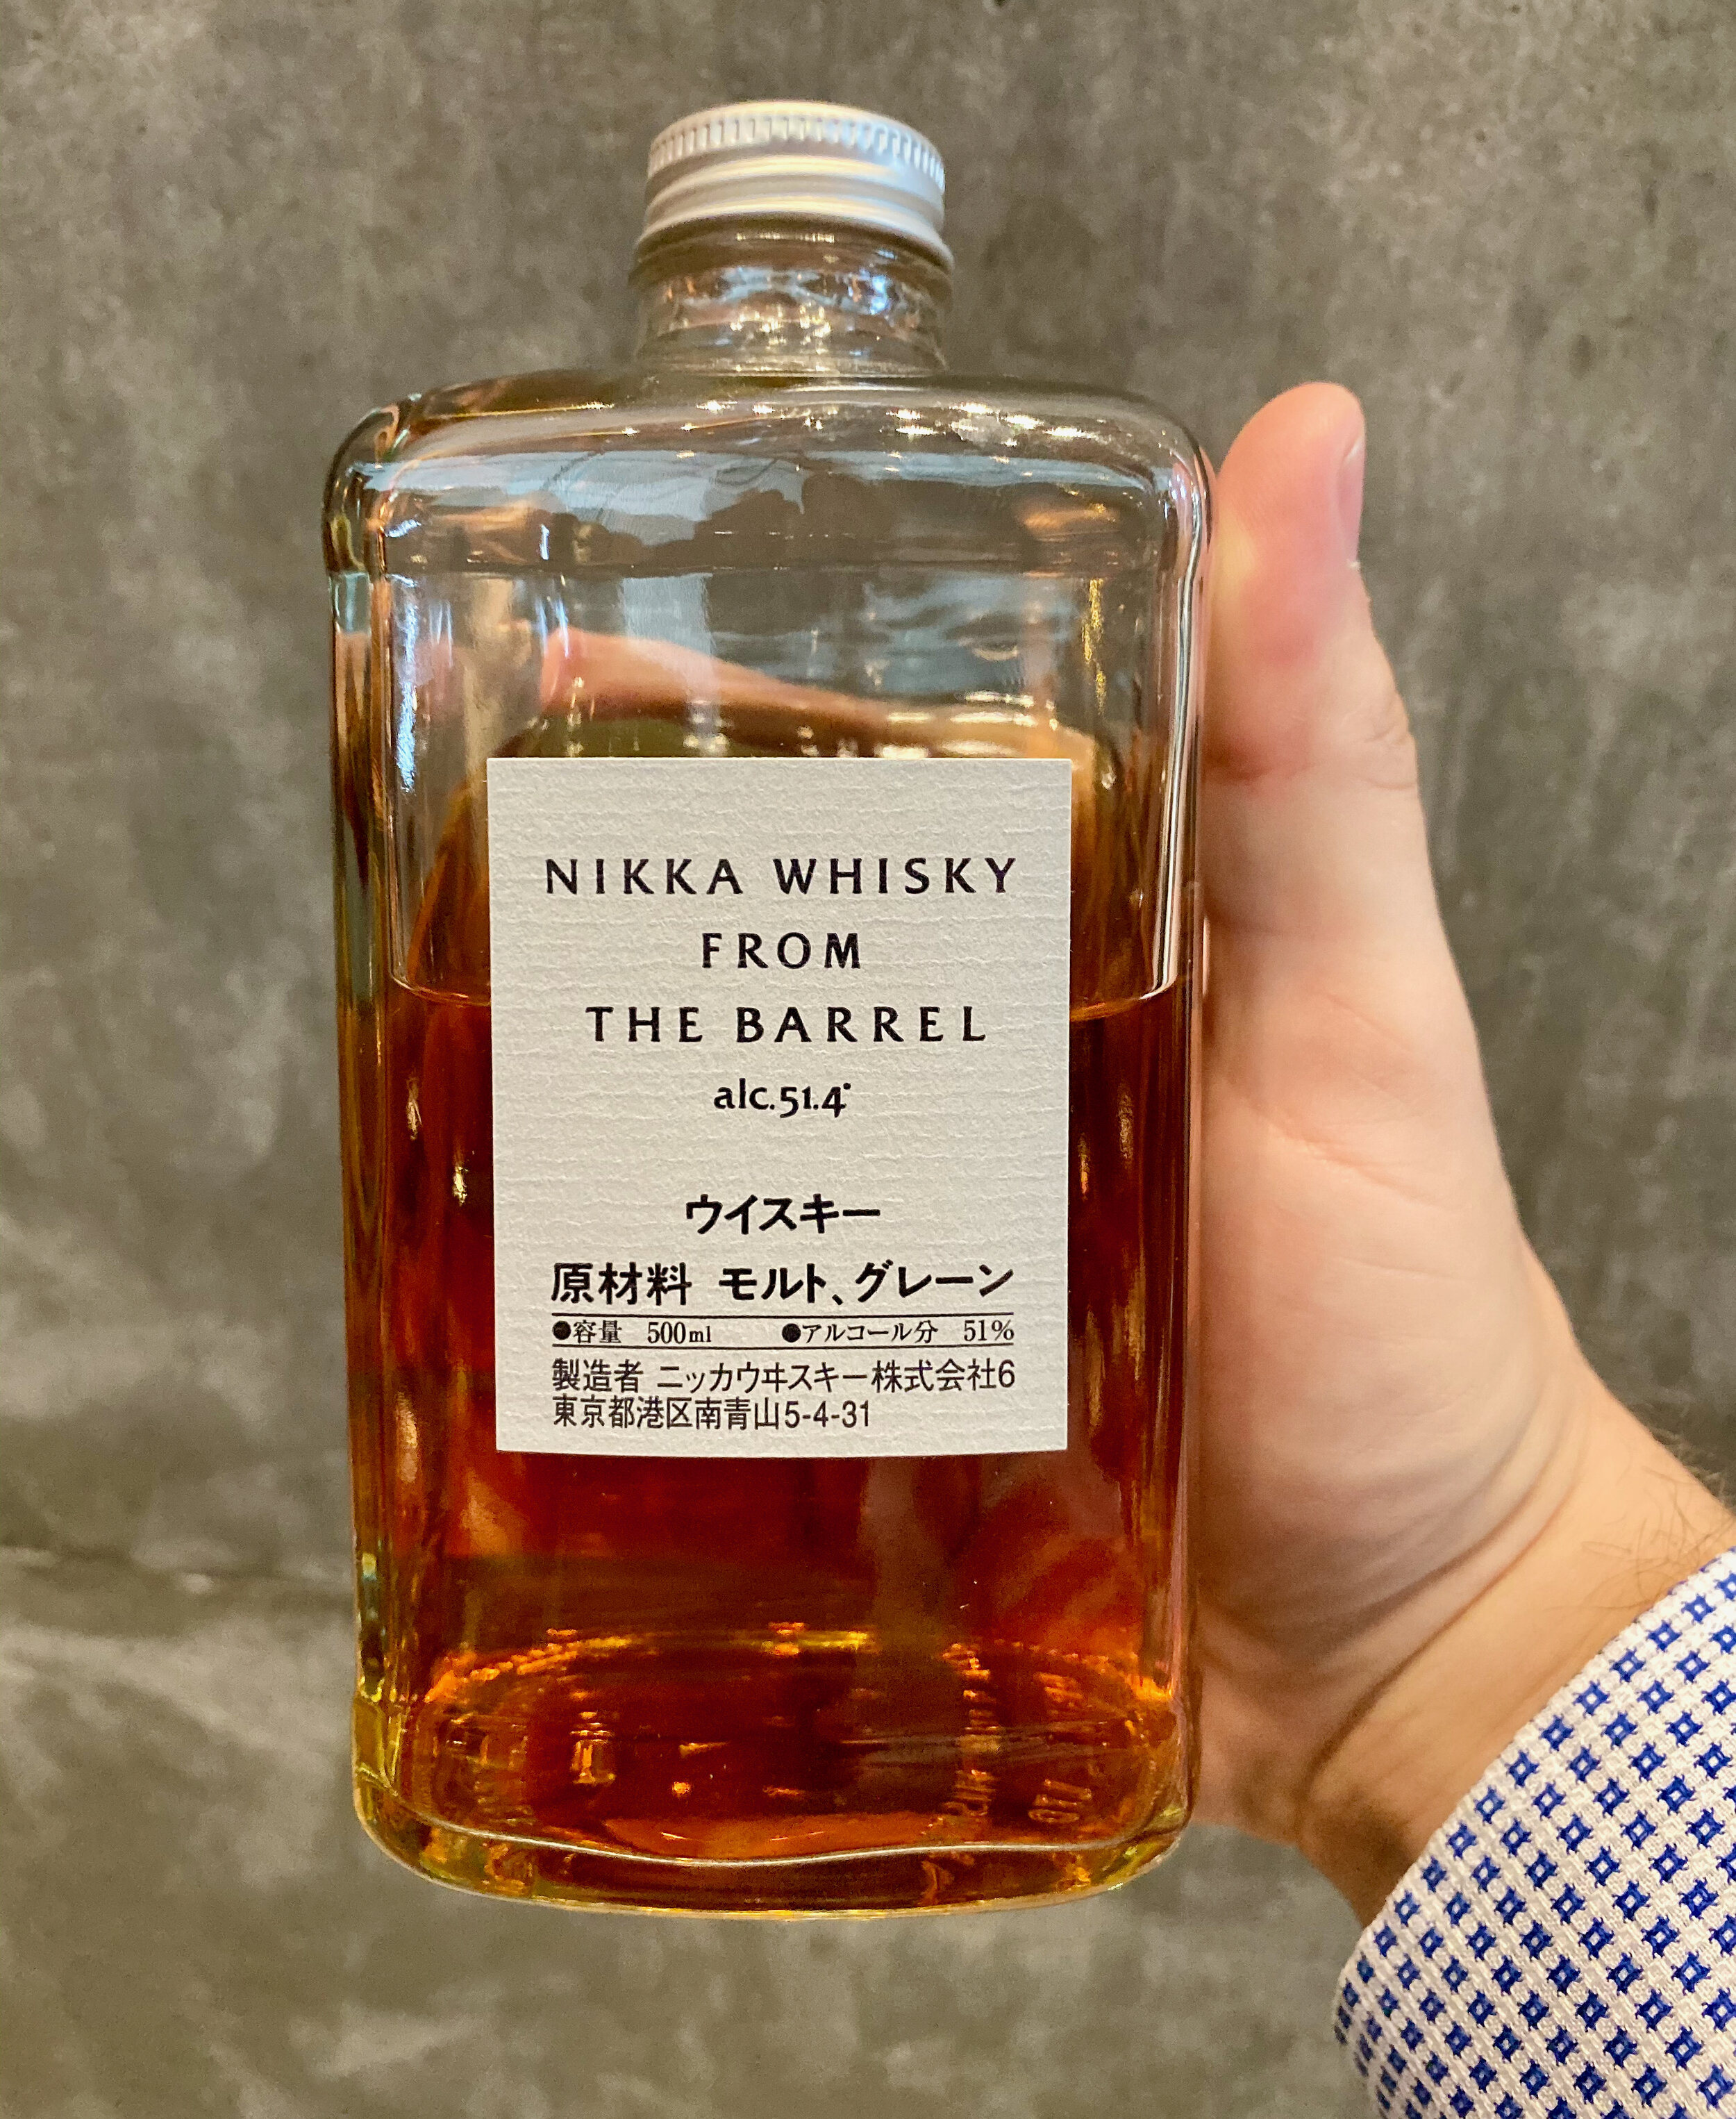 Nikka Whisky From the Barrel 51.4% ABV - Possibly the best